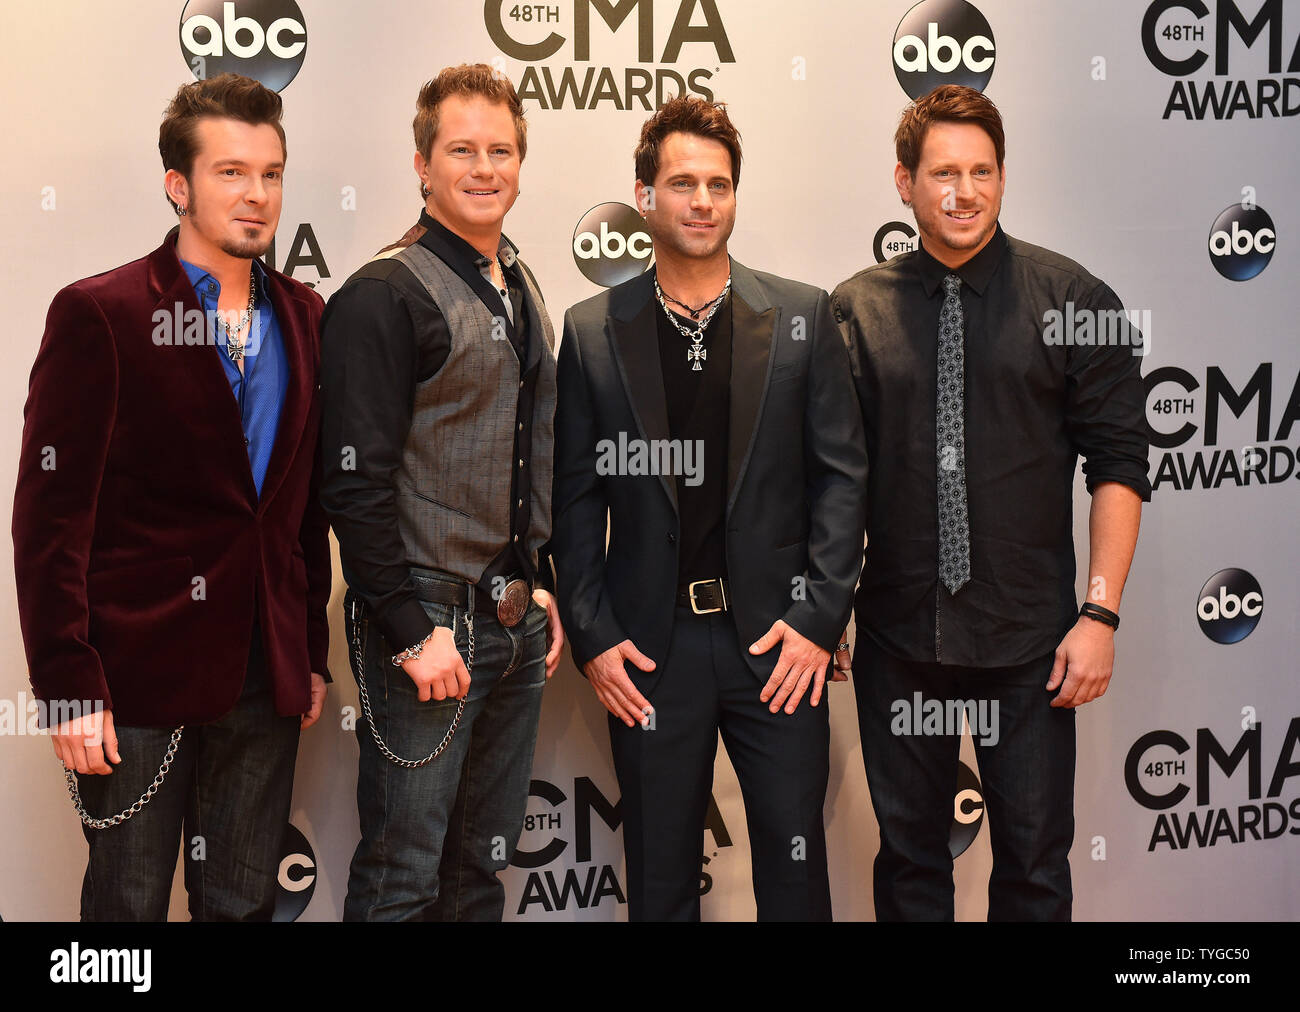 Parmalee arrives on the red carpet for the 48th Annual Country Music Awards at Bridgestone Arena in Nashville on November 5, 2014. UPI/Kevin Dietsch Stock Photo